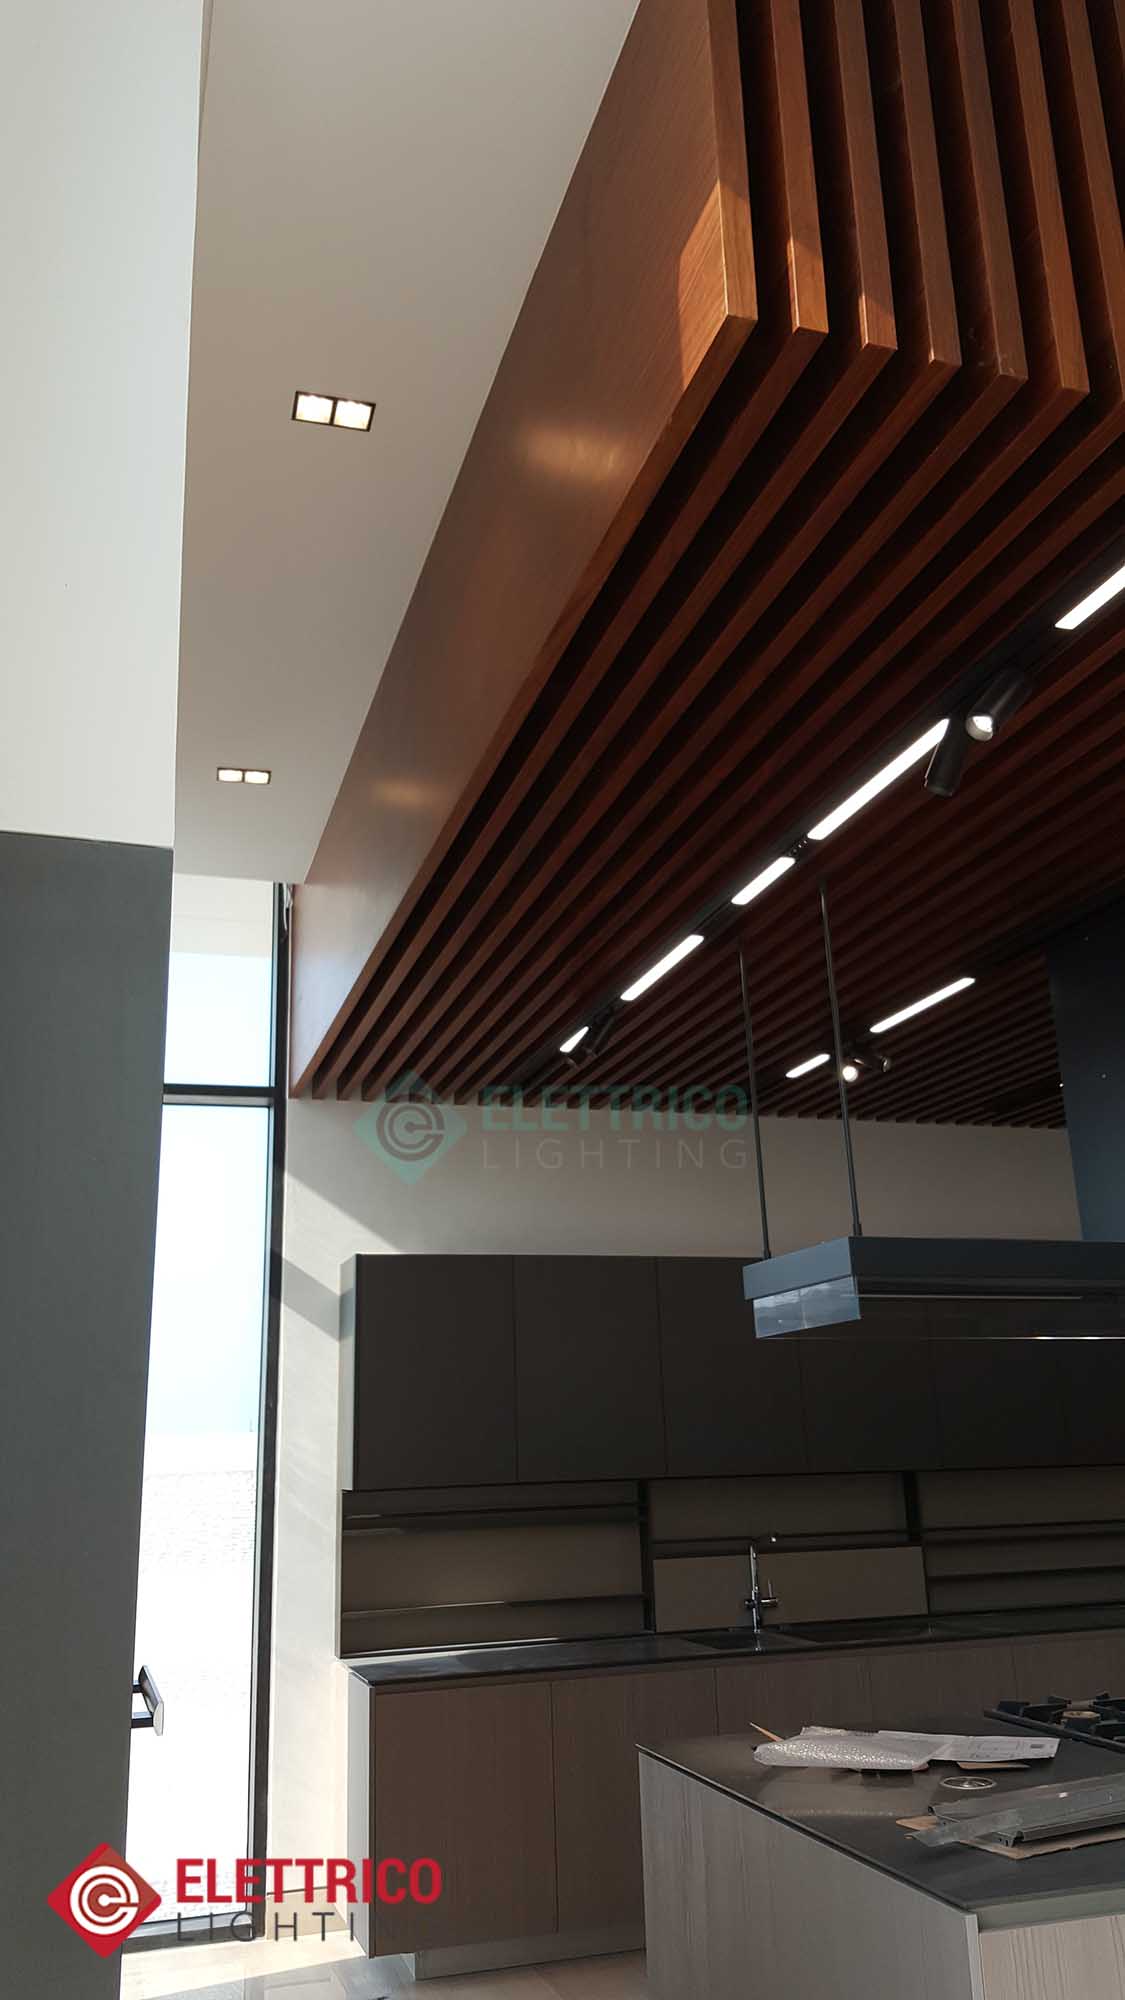 Spotlighting track systems installed in the ceiling